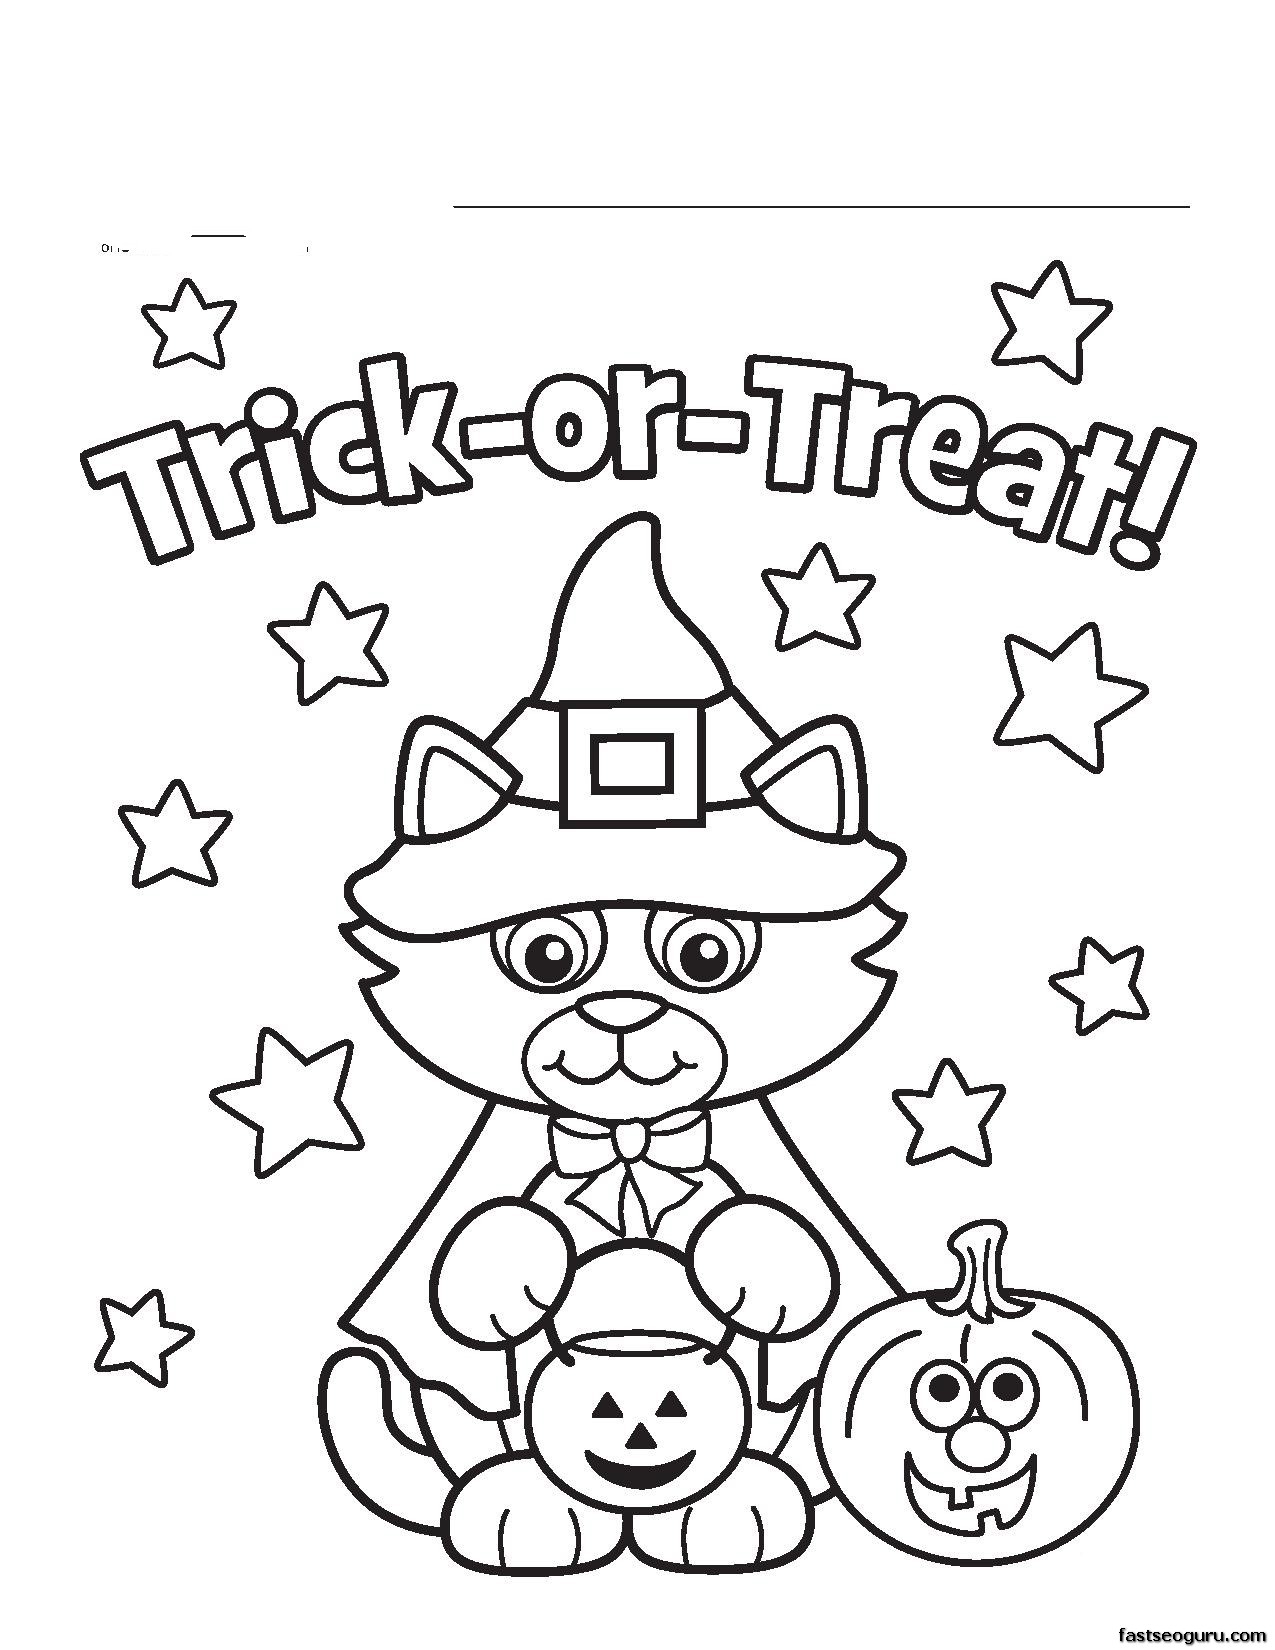 Simple Halloween Coloring Pages At GetColorings Free Printable Colorings Pages To Print